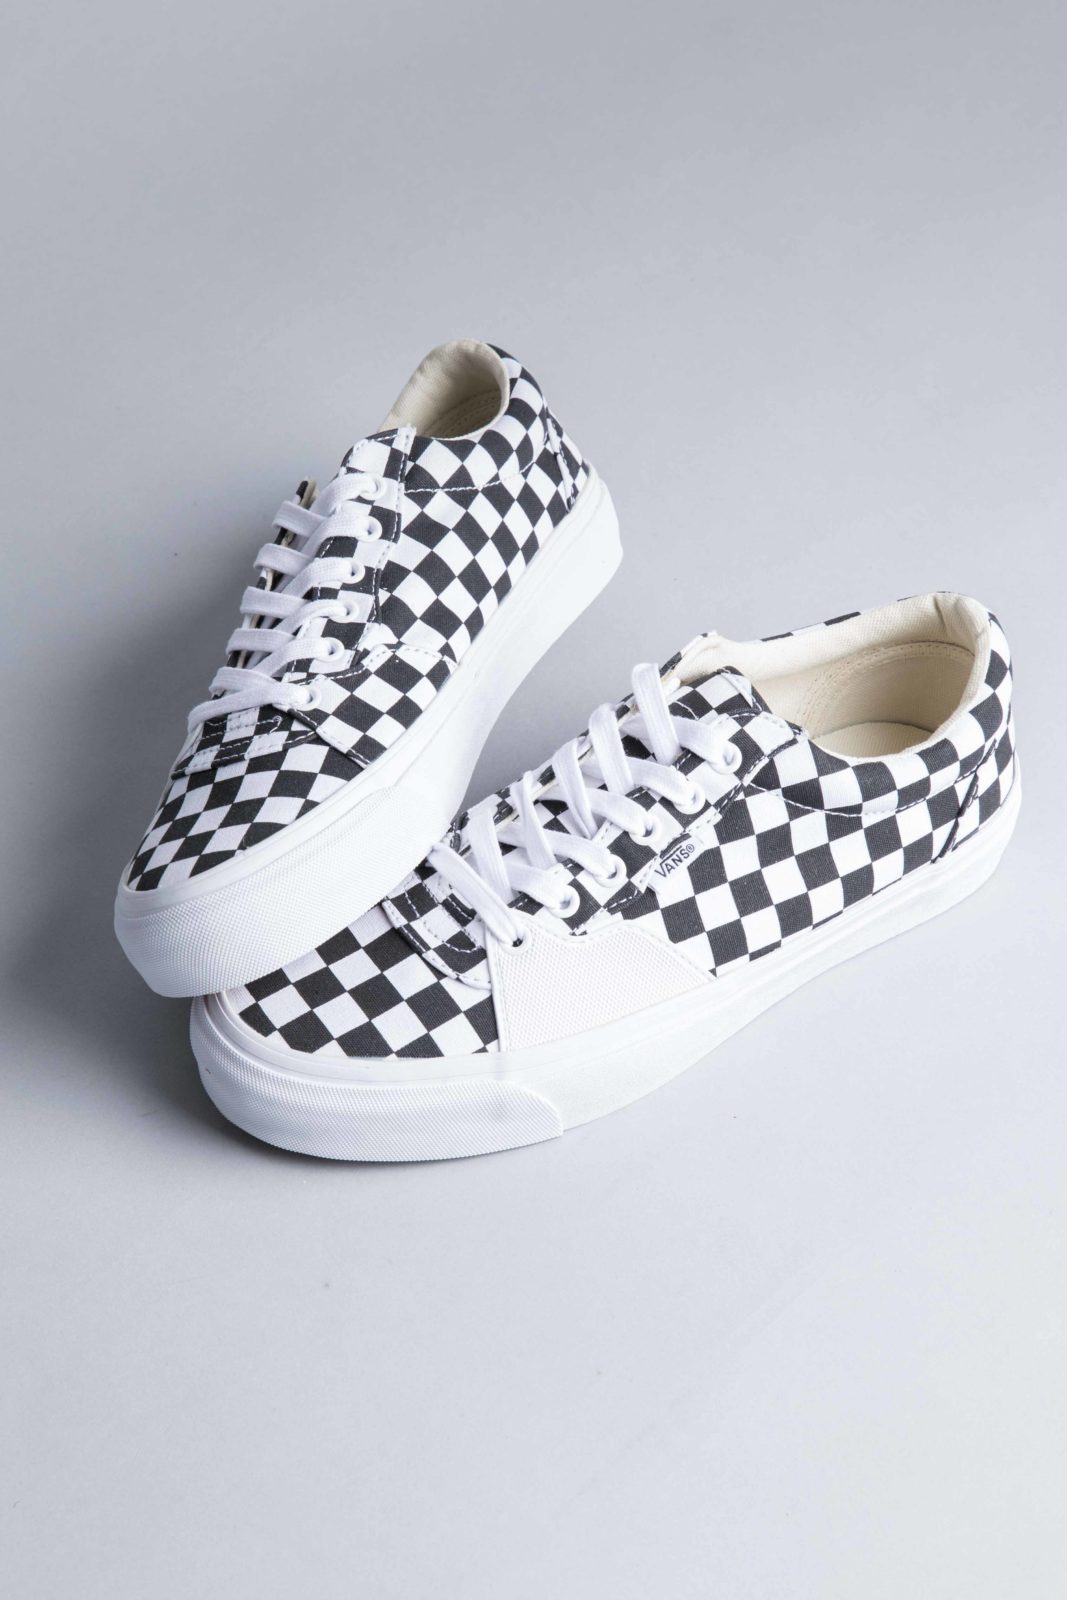 black and white low top vans checkered